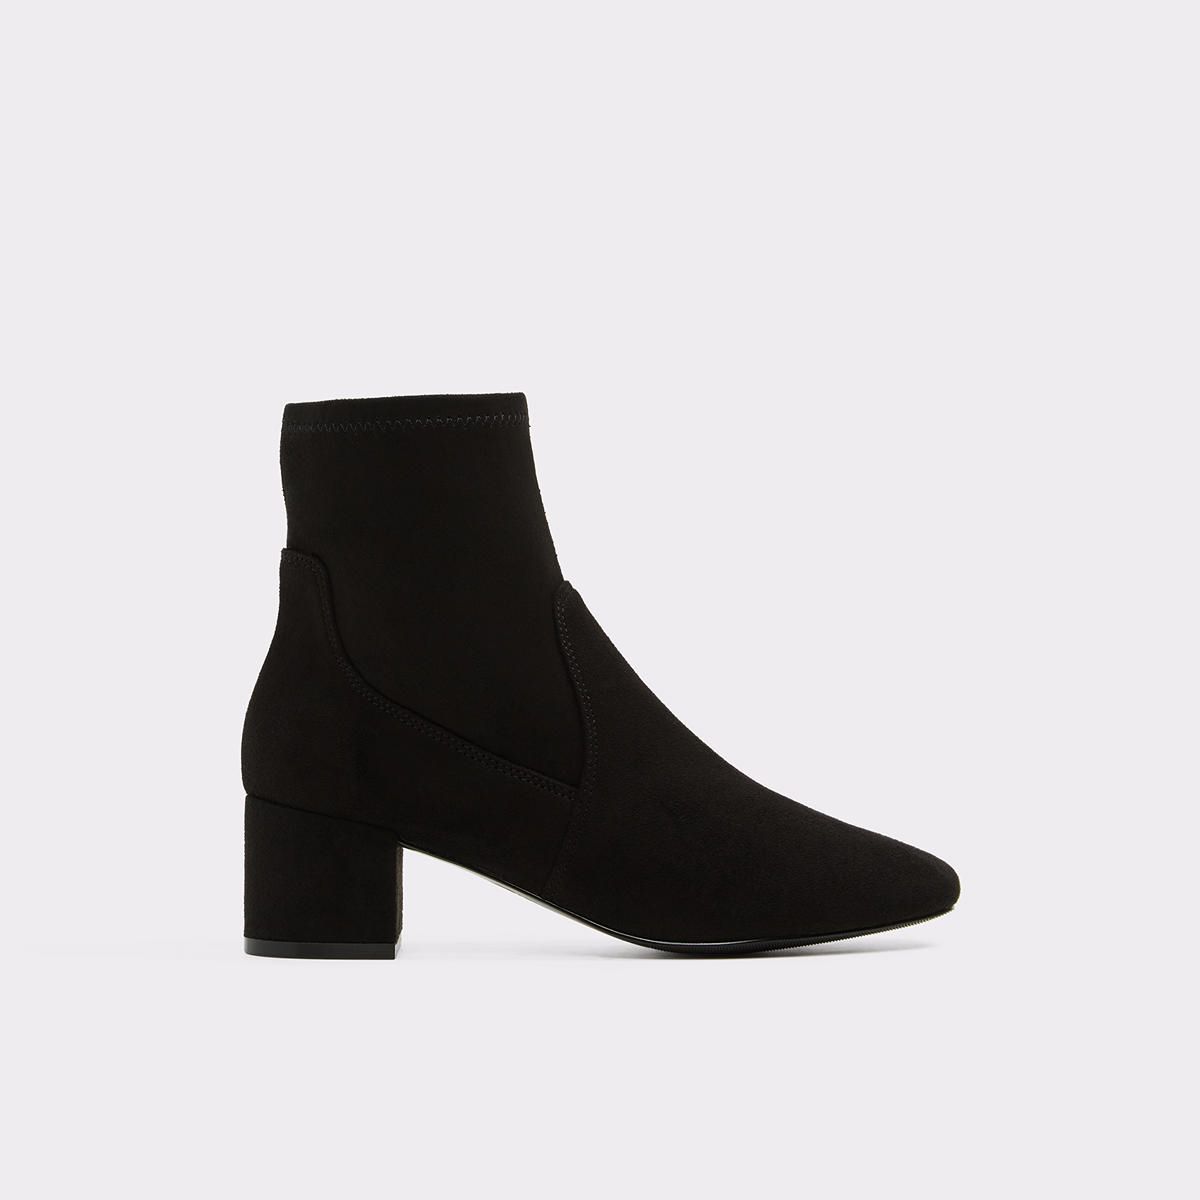 Lothelimma Midnight Black Women's Ankle boots | Aldo Shoes (US)